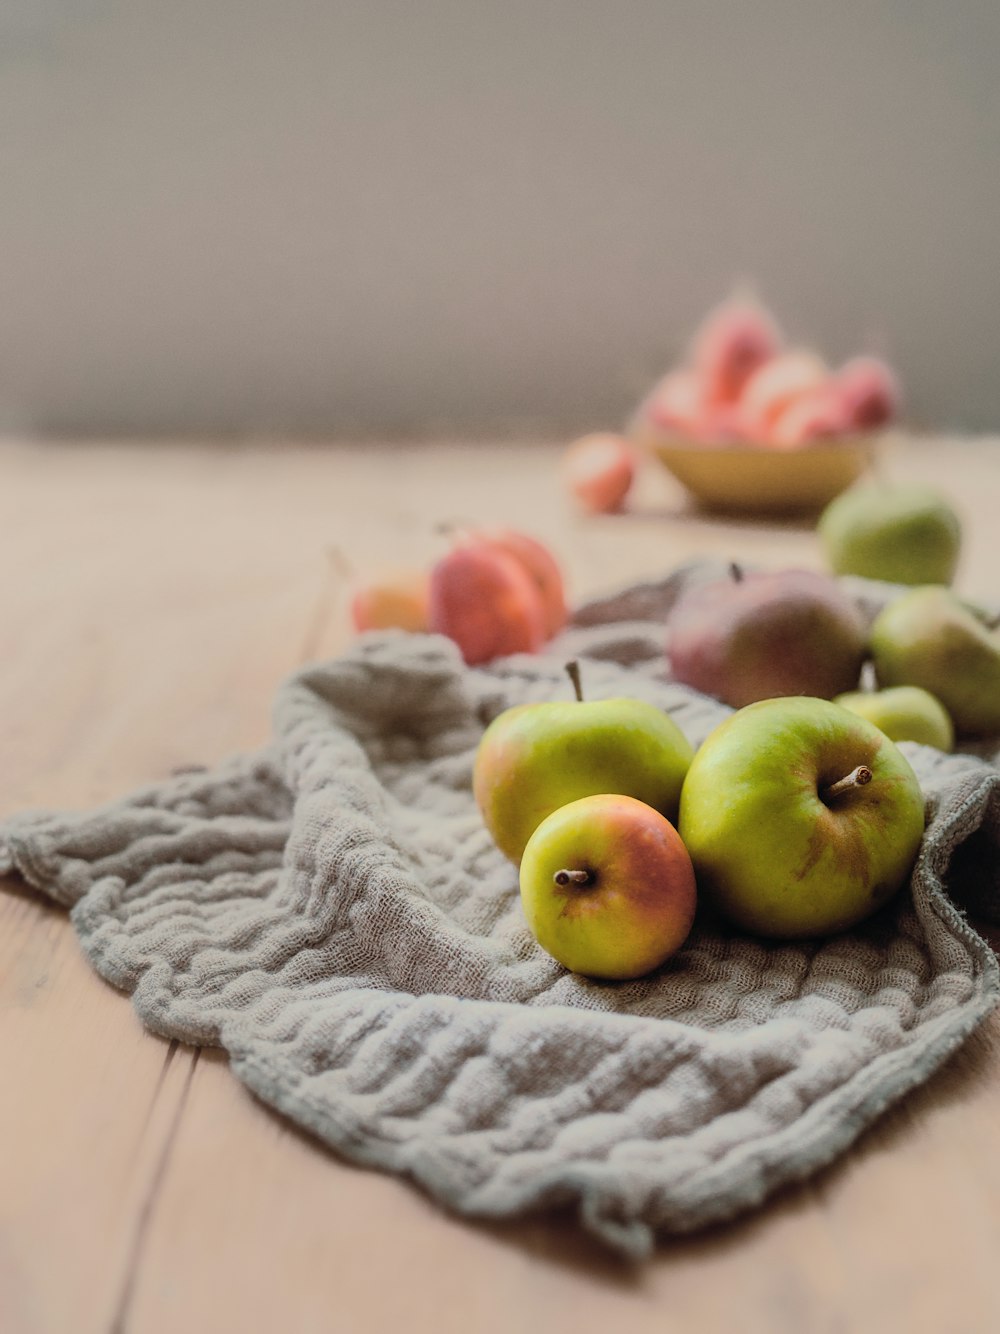 green and red apples on gray textile